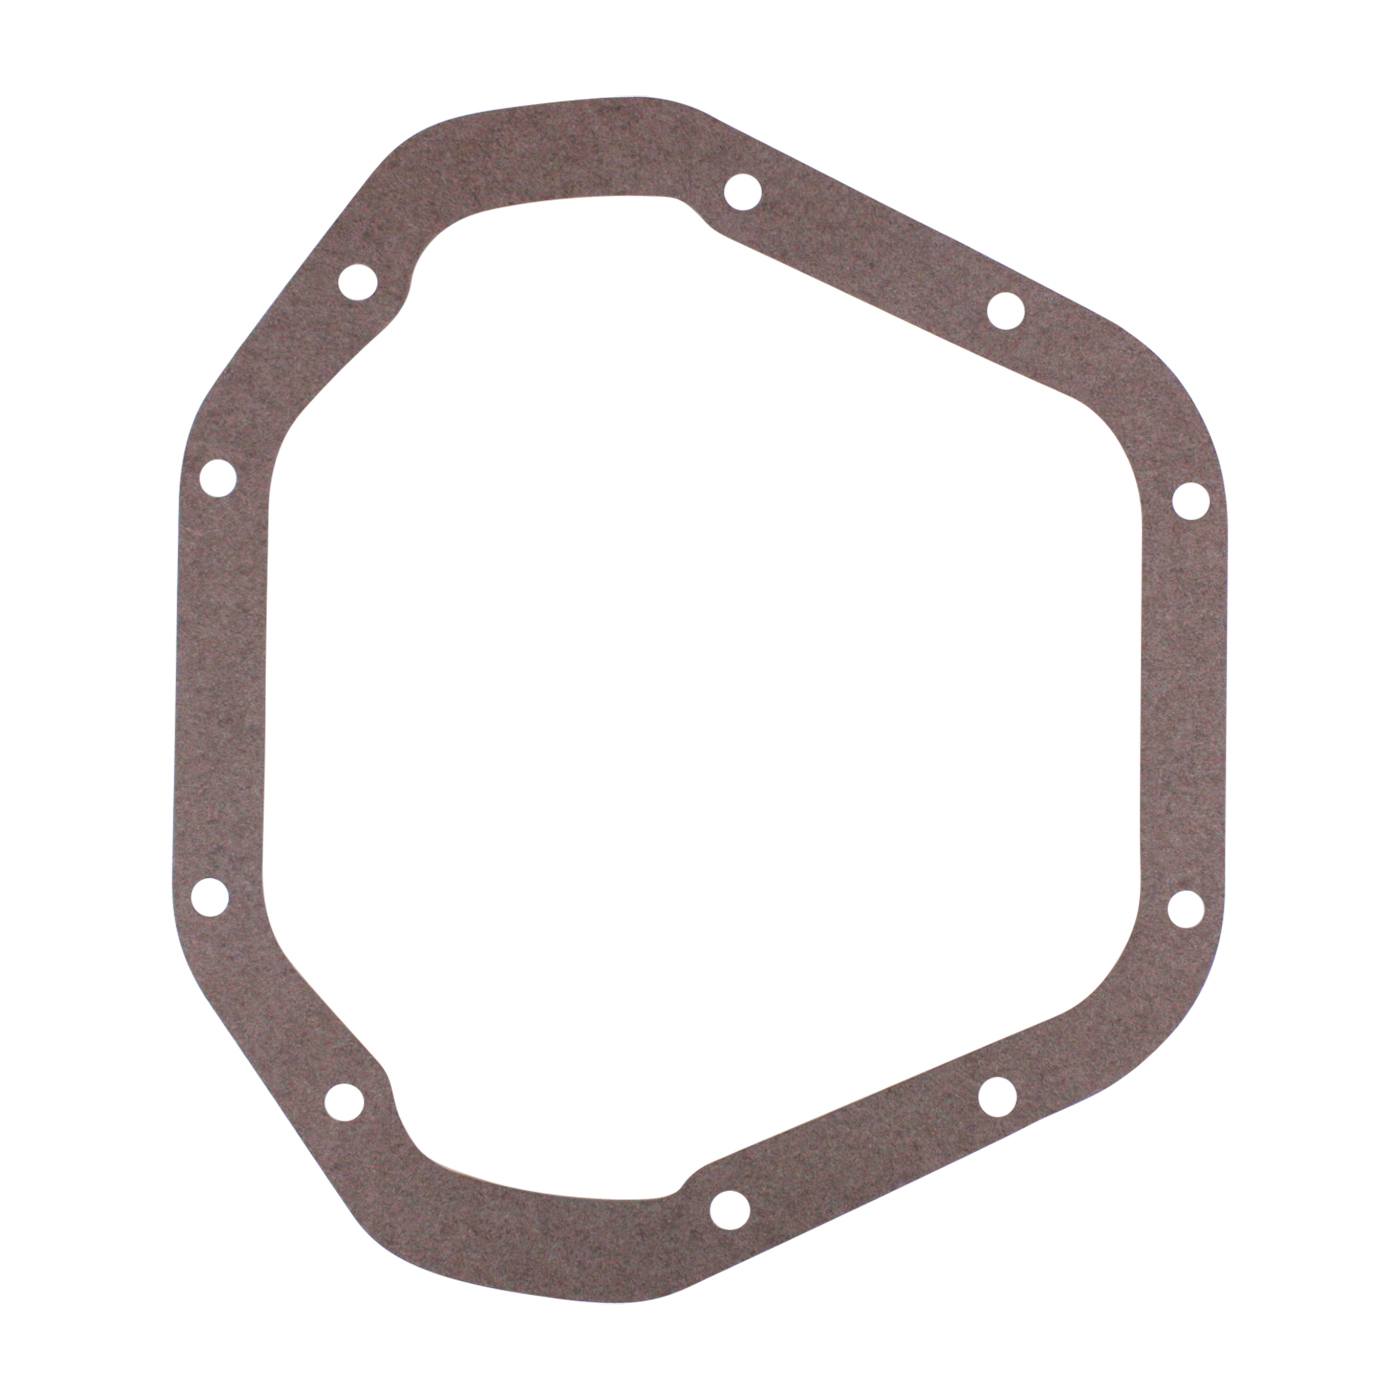  Differential Cover Gasket, Dana 60